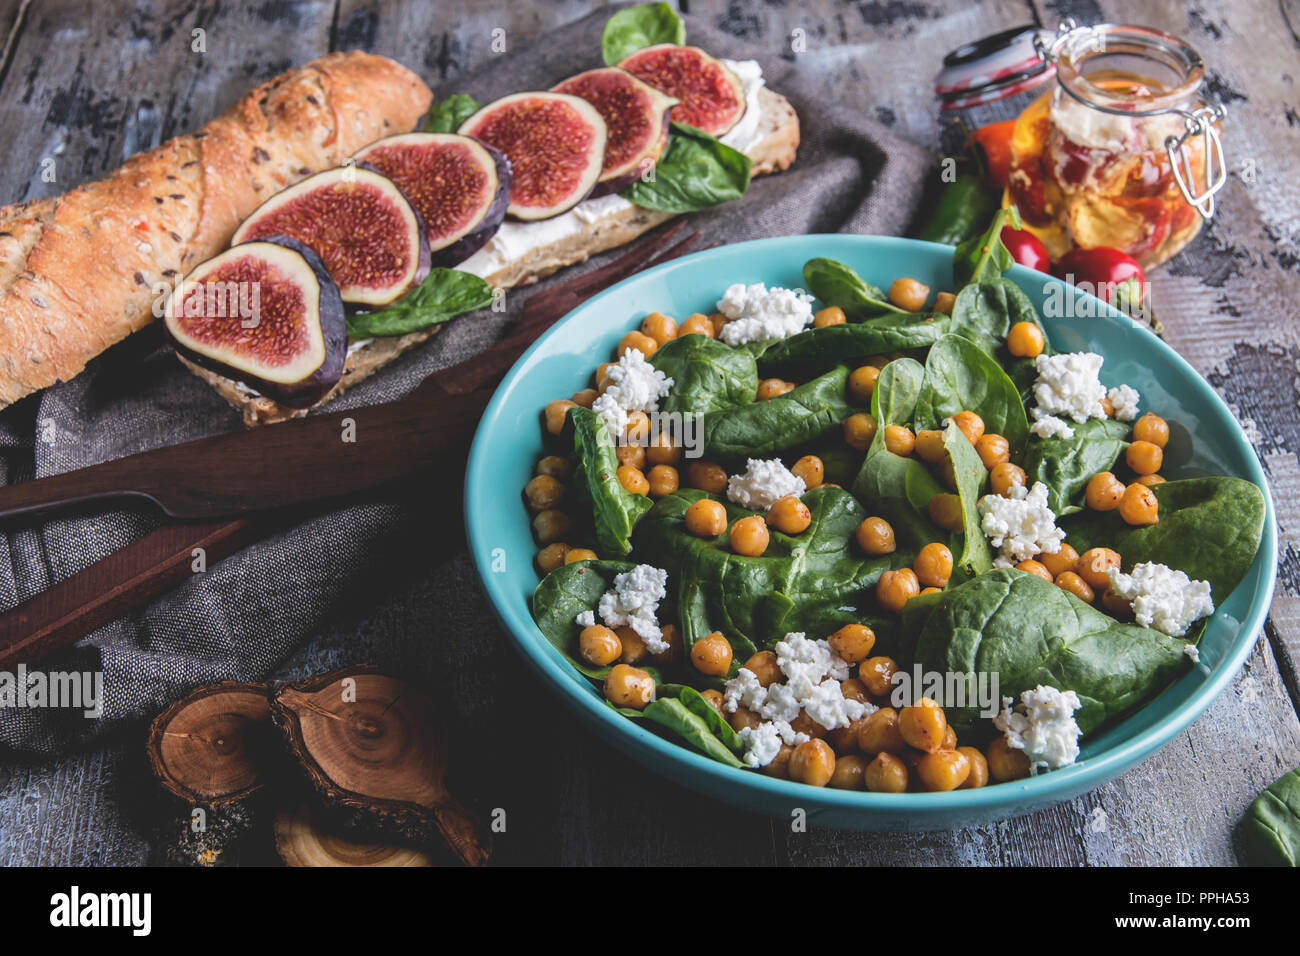 Chickpea and veggies salad with spinach leaves, homemade cheese,healthy vegan food,sandwich with figs, diet dish Stock Photo